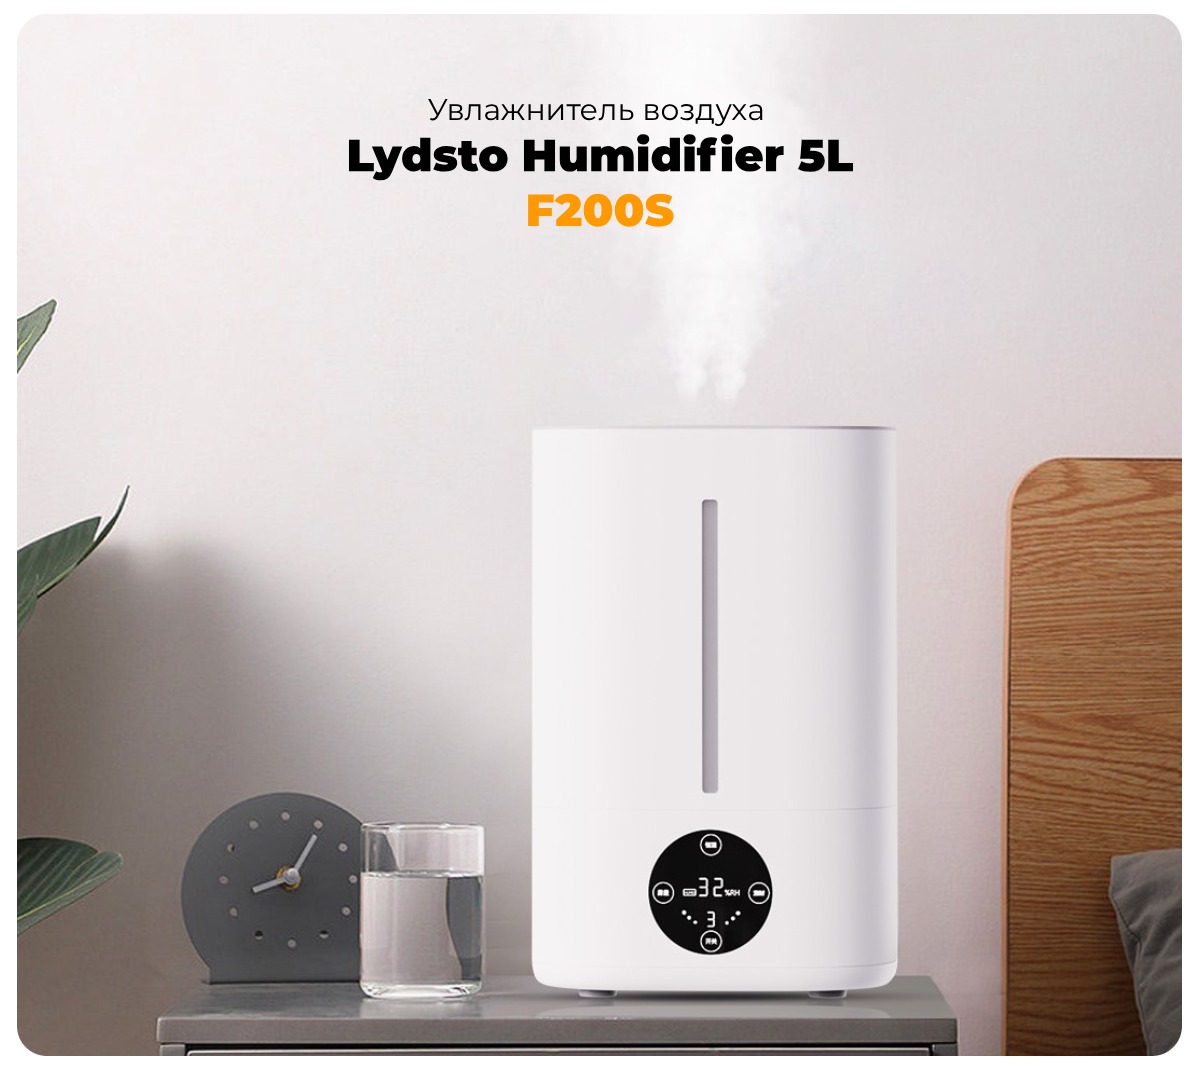 Lydsto-Humidifier-5L-F200S-01